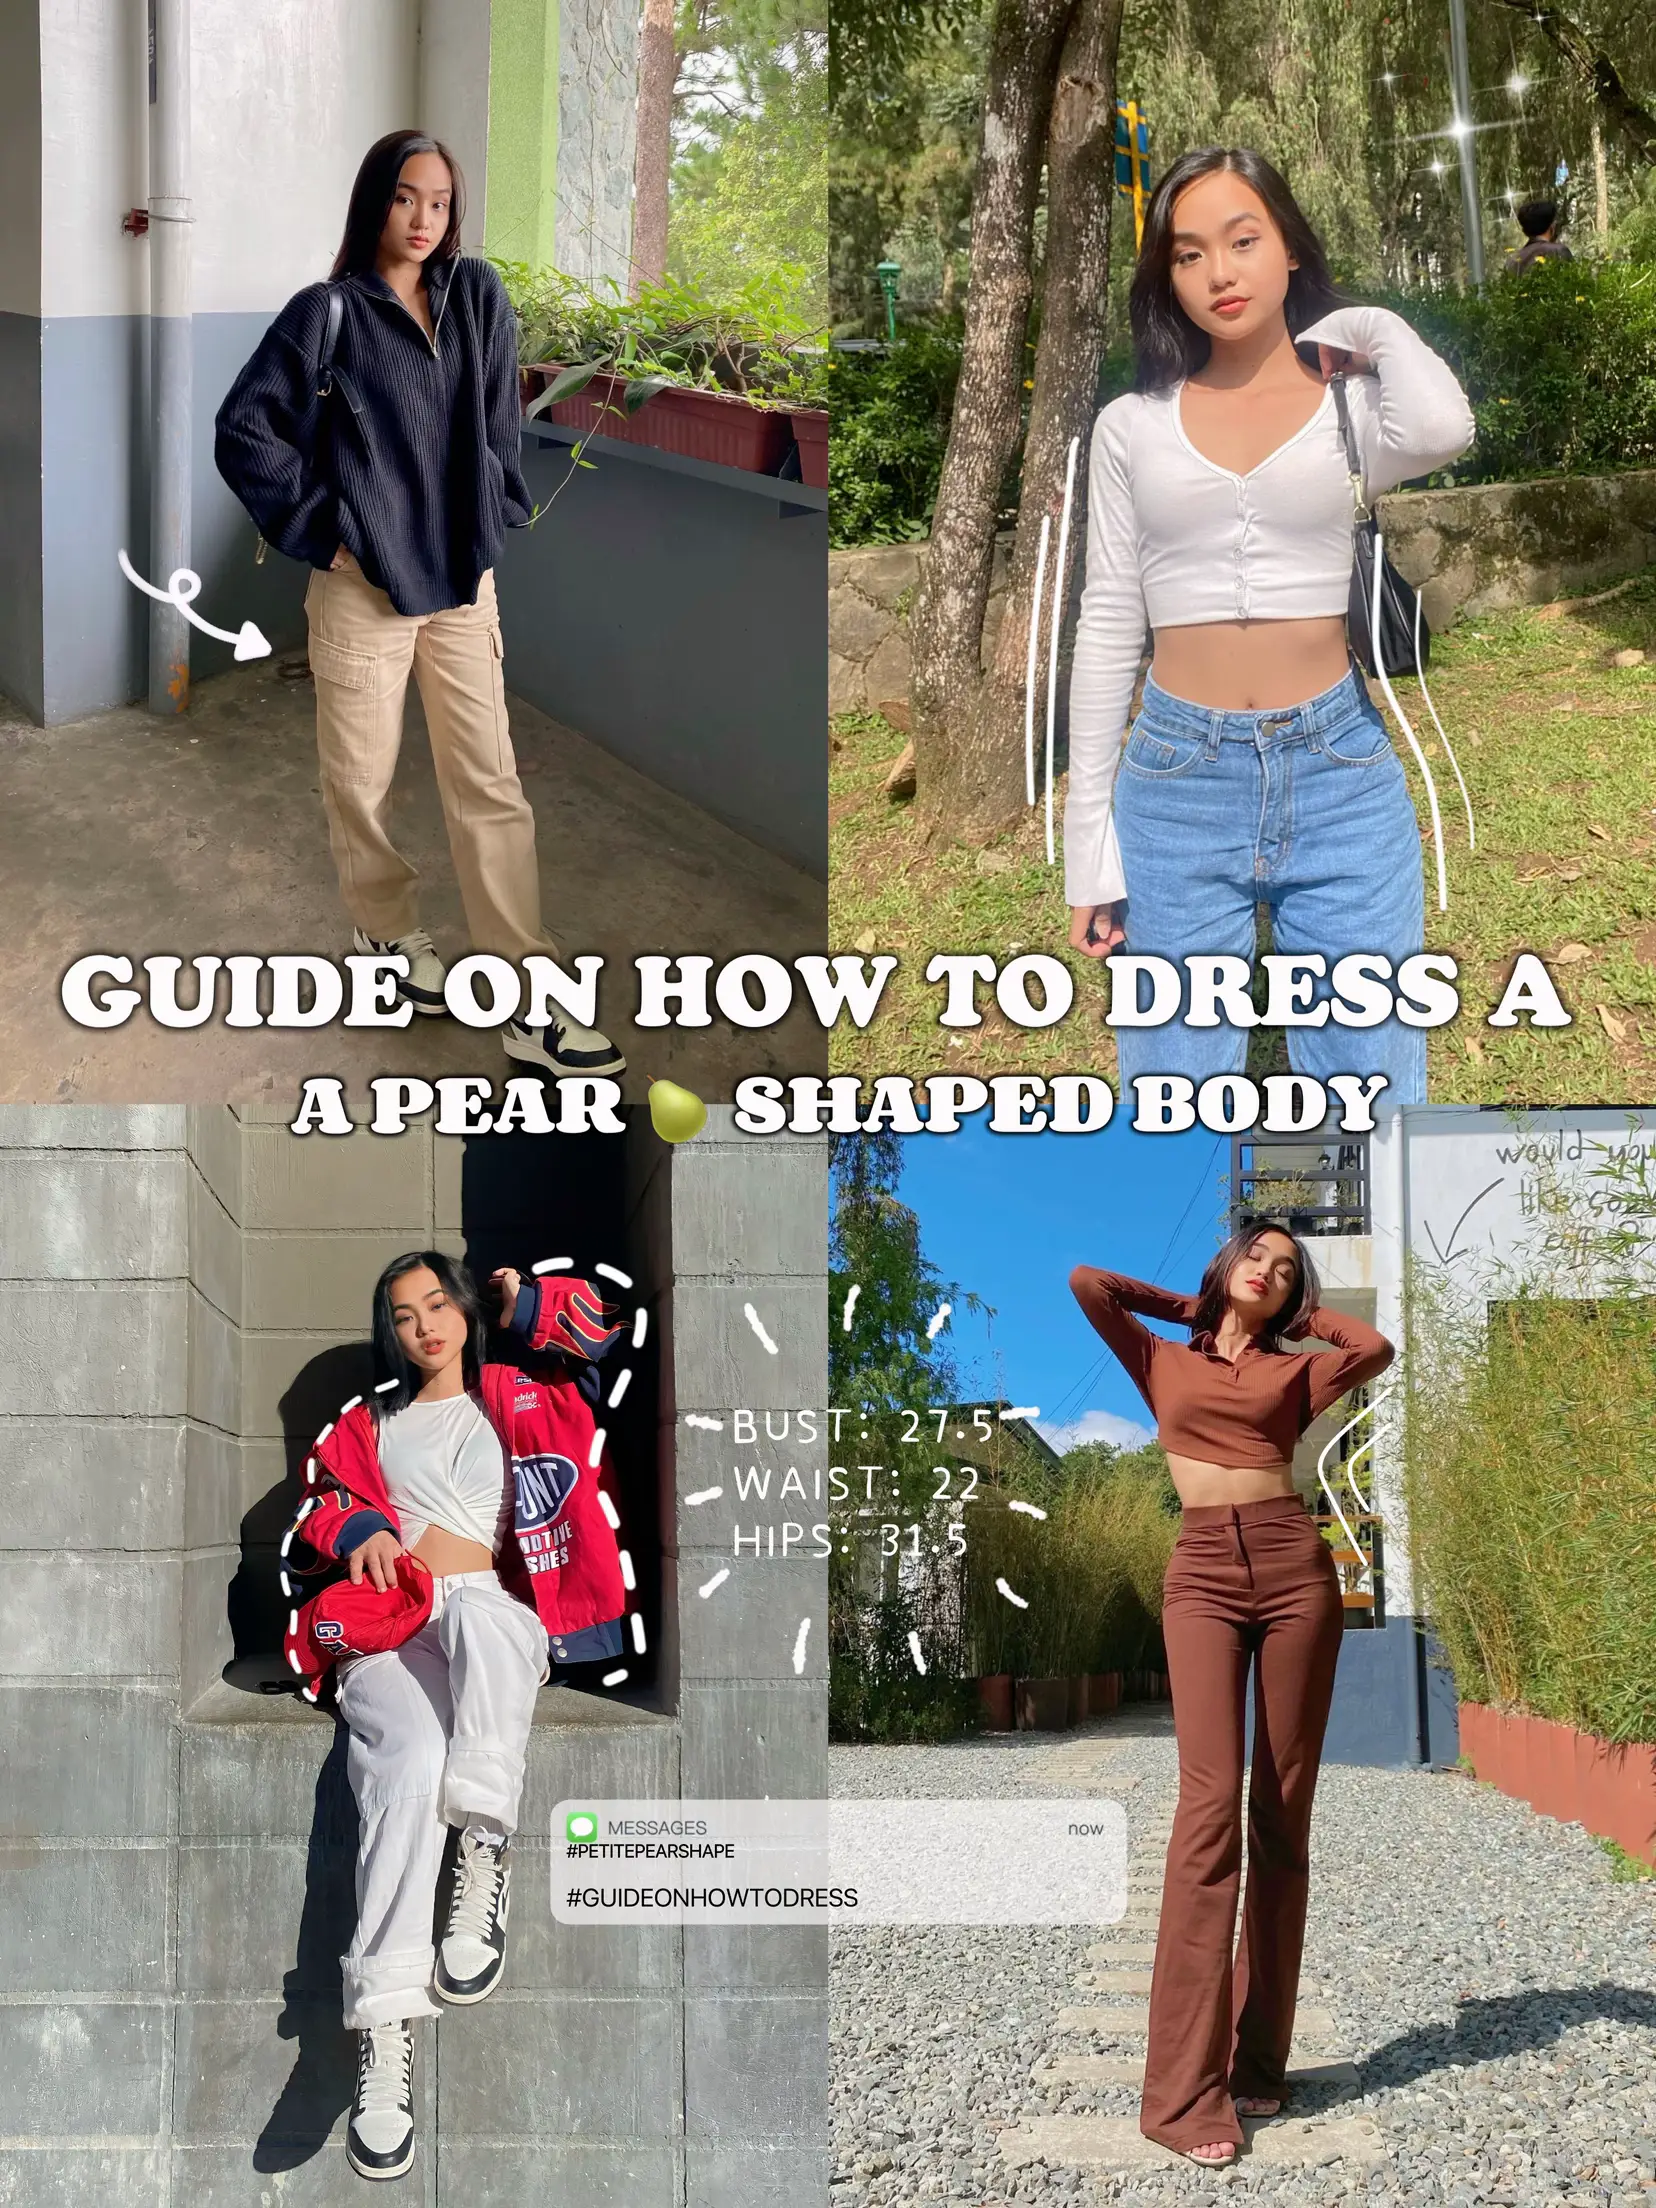 GUIDE ON HOW TO DRESS A PEAR SHAPED BODY